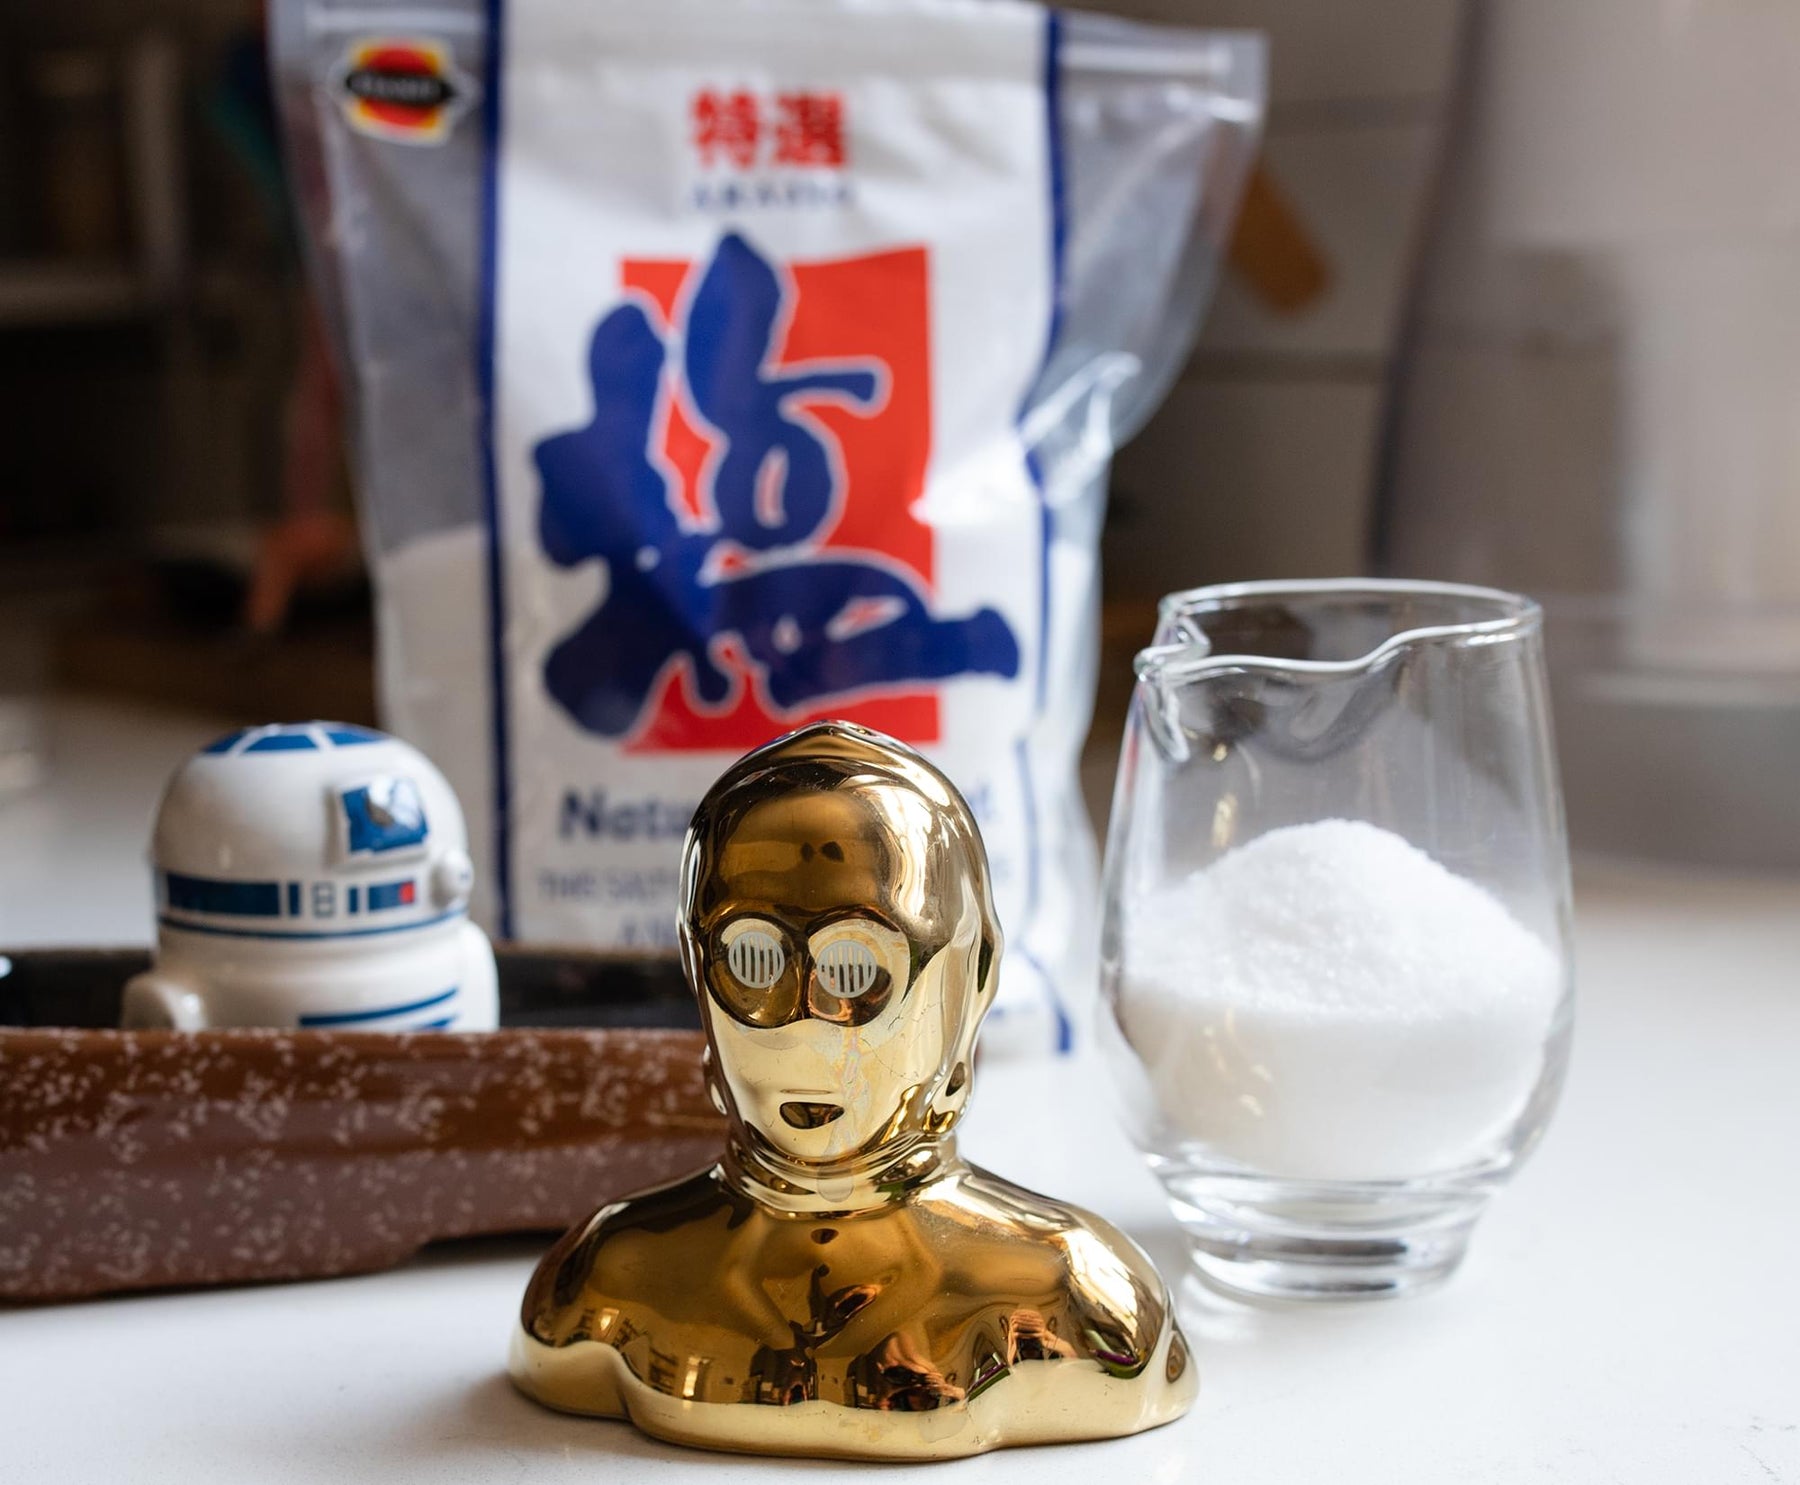 Star Wars C-3PO and R2-D2 Ceramic Shaker Set with Sandcrawler Display Tray